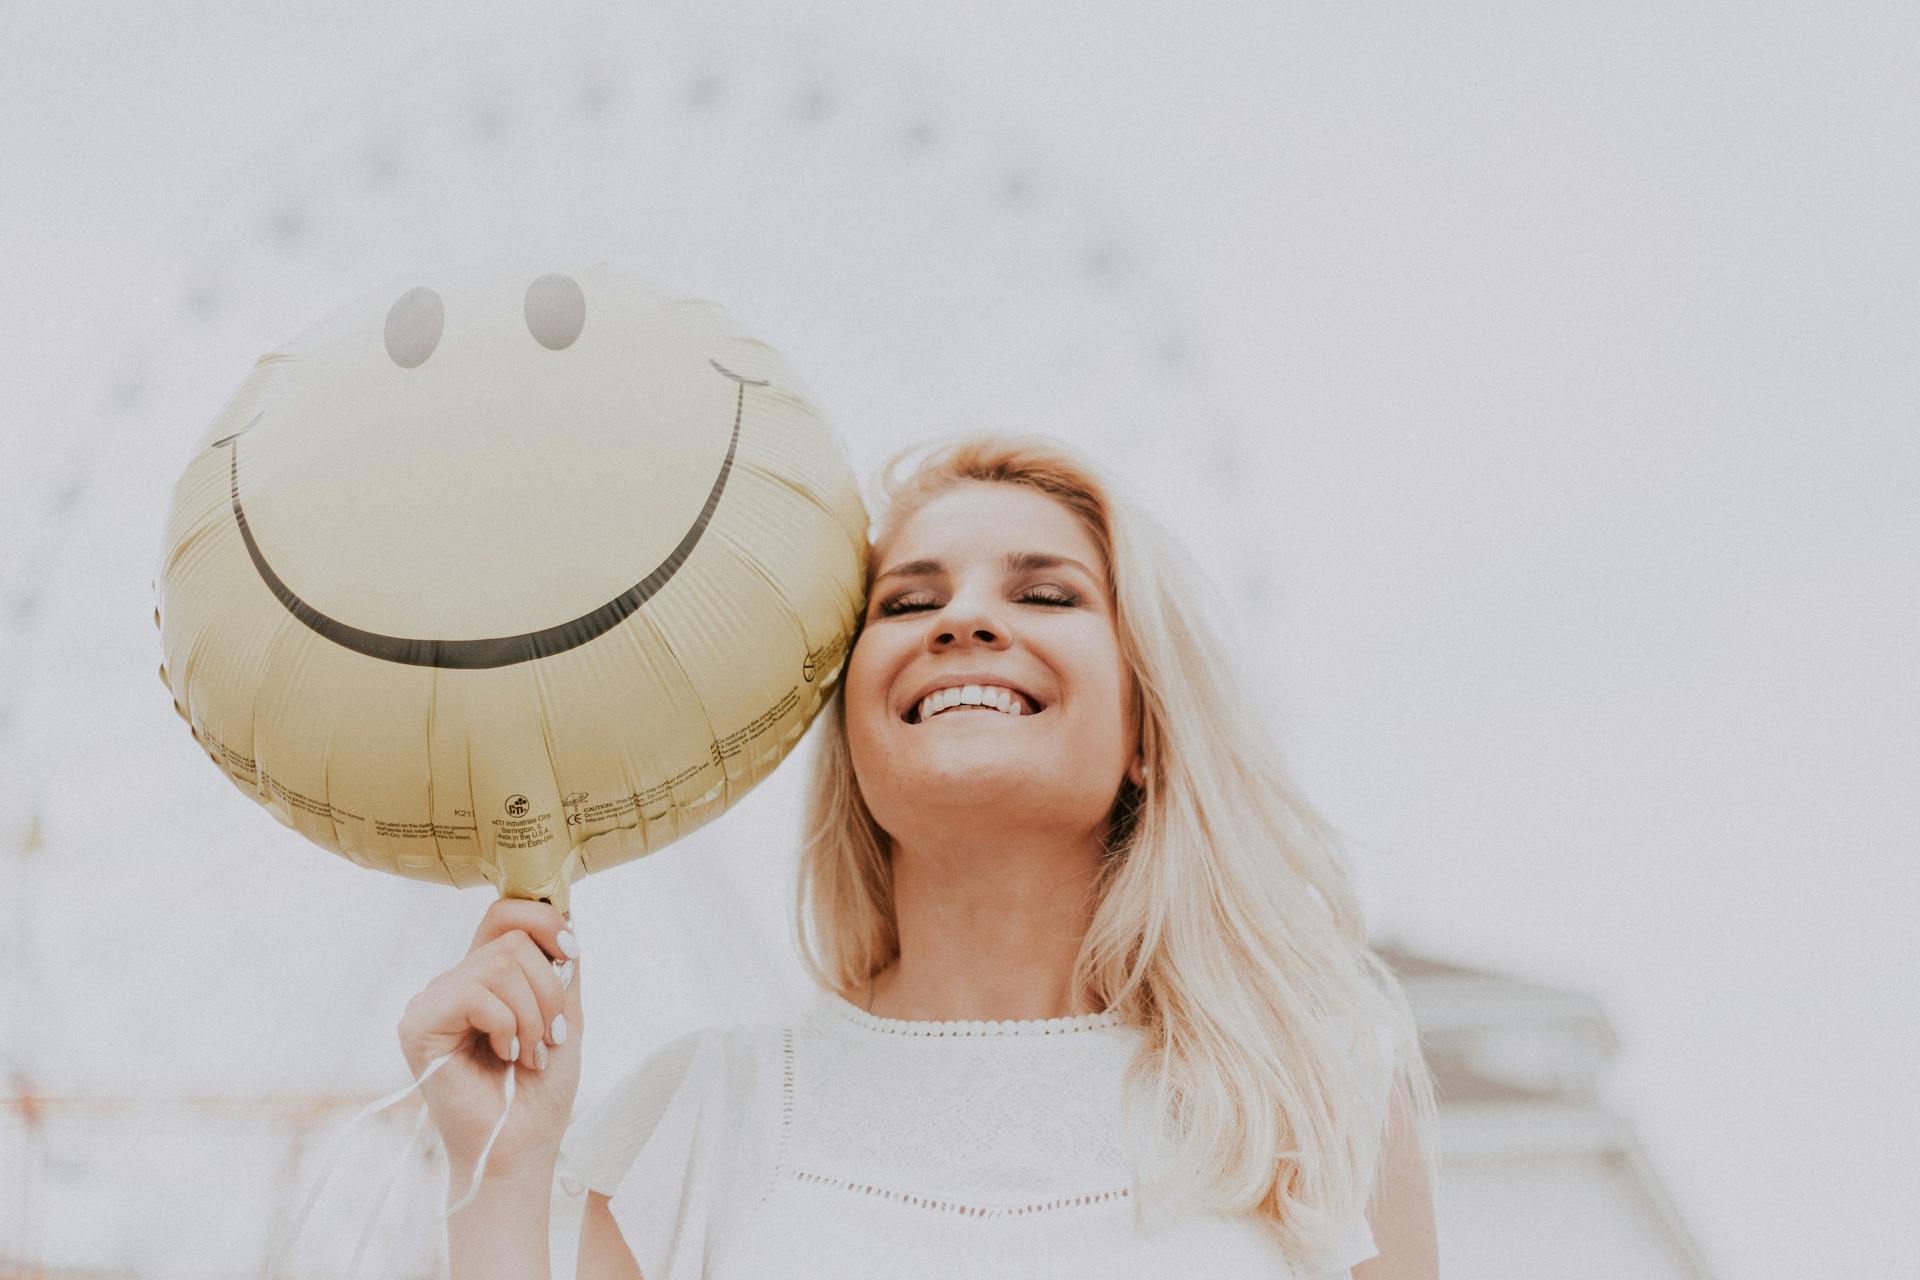 Woman holding a balloon with a smile | Source: Pexels